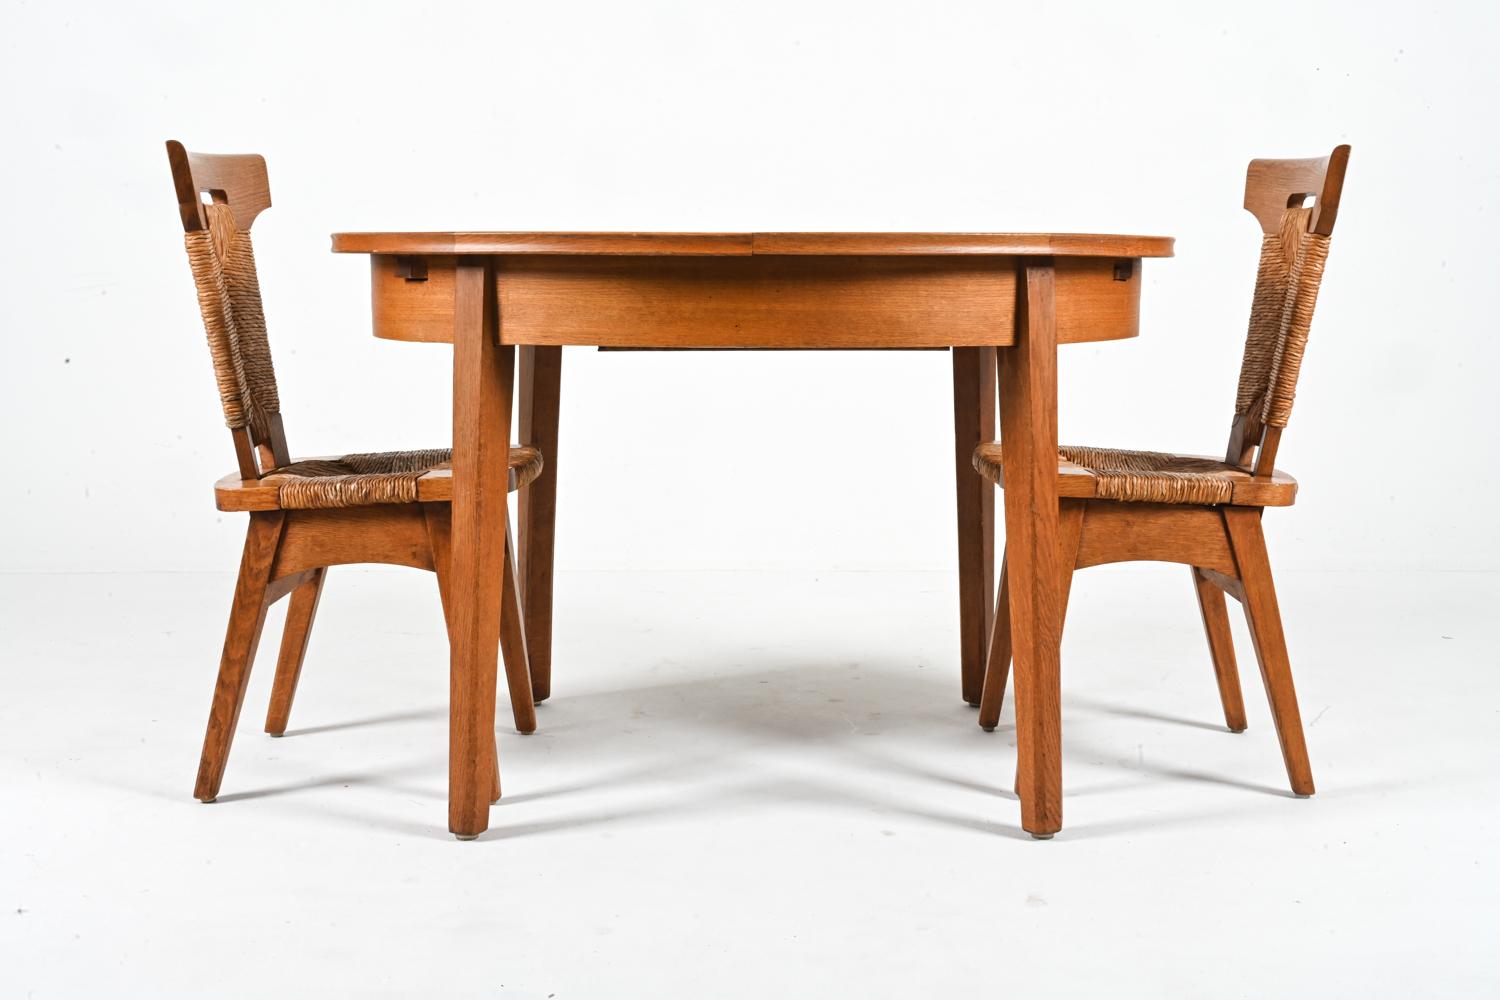 20th Century W. Kuyper Dutch Arts & Crafts Dining Suite in Oak & Rush, c. 1920s For Sale